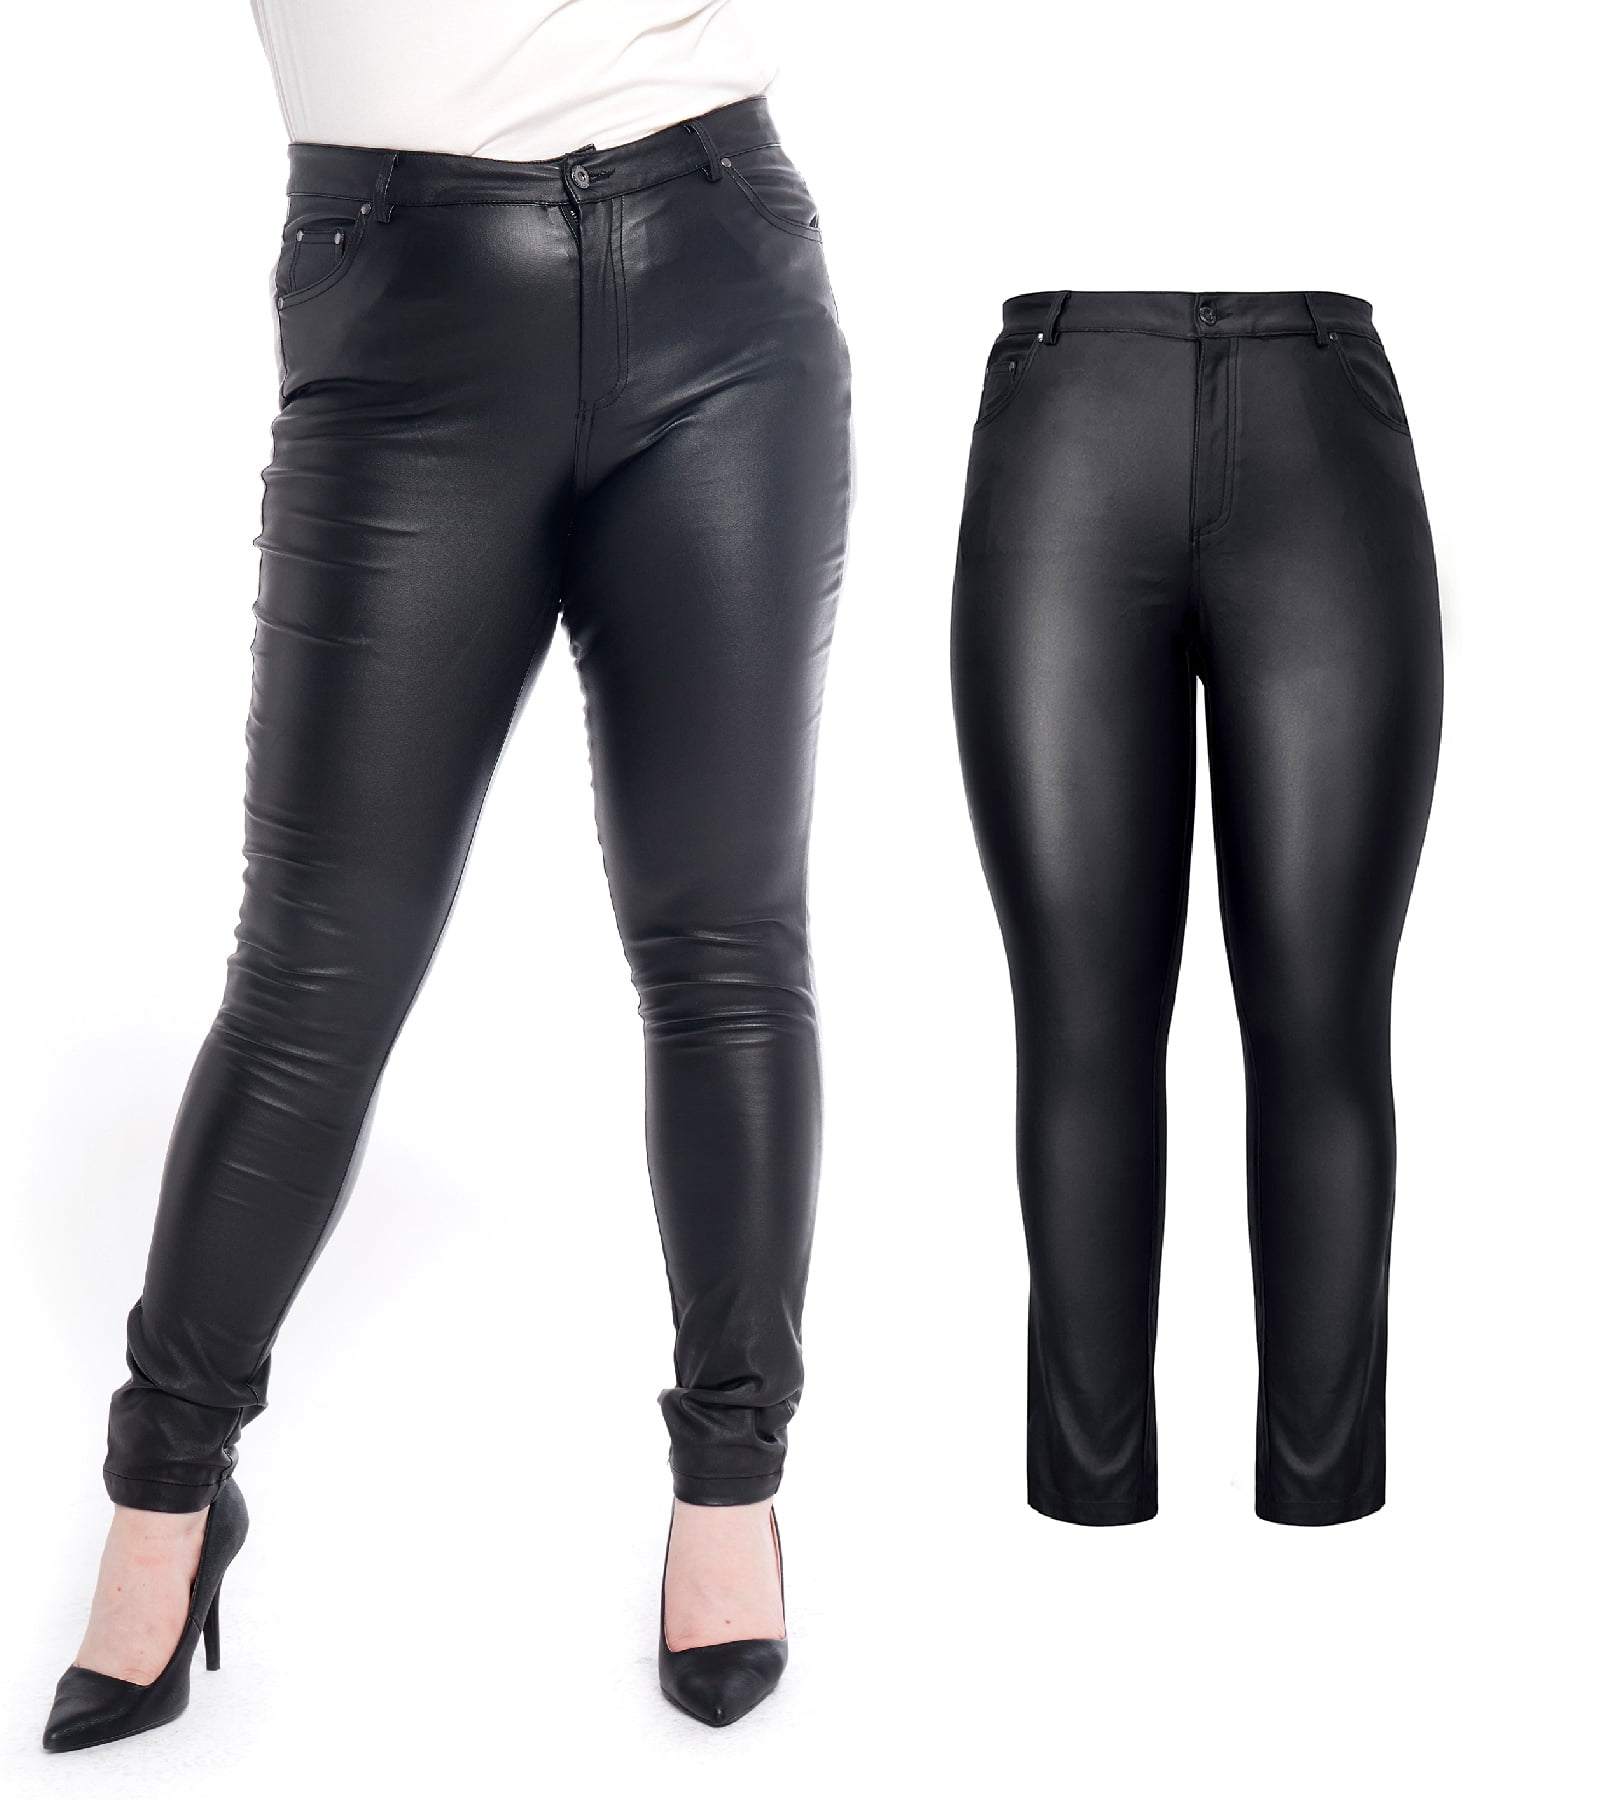 S P Y M Women's Stretchy Jeggings, Faux Leather Legging Pants with Zipper  Pockets, Regular and Plus Size 